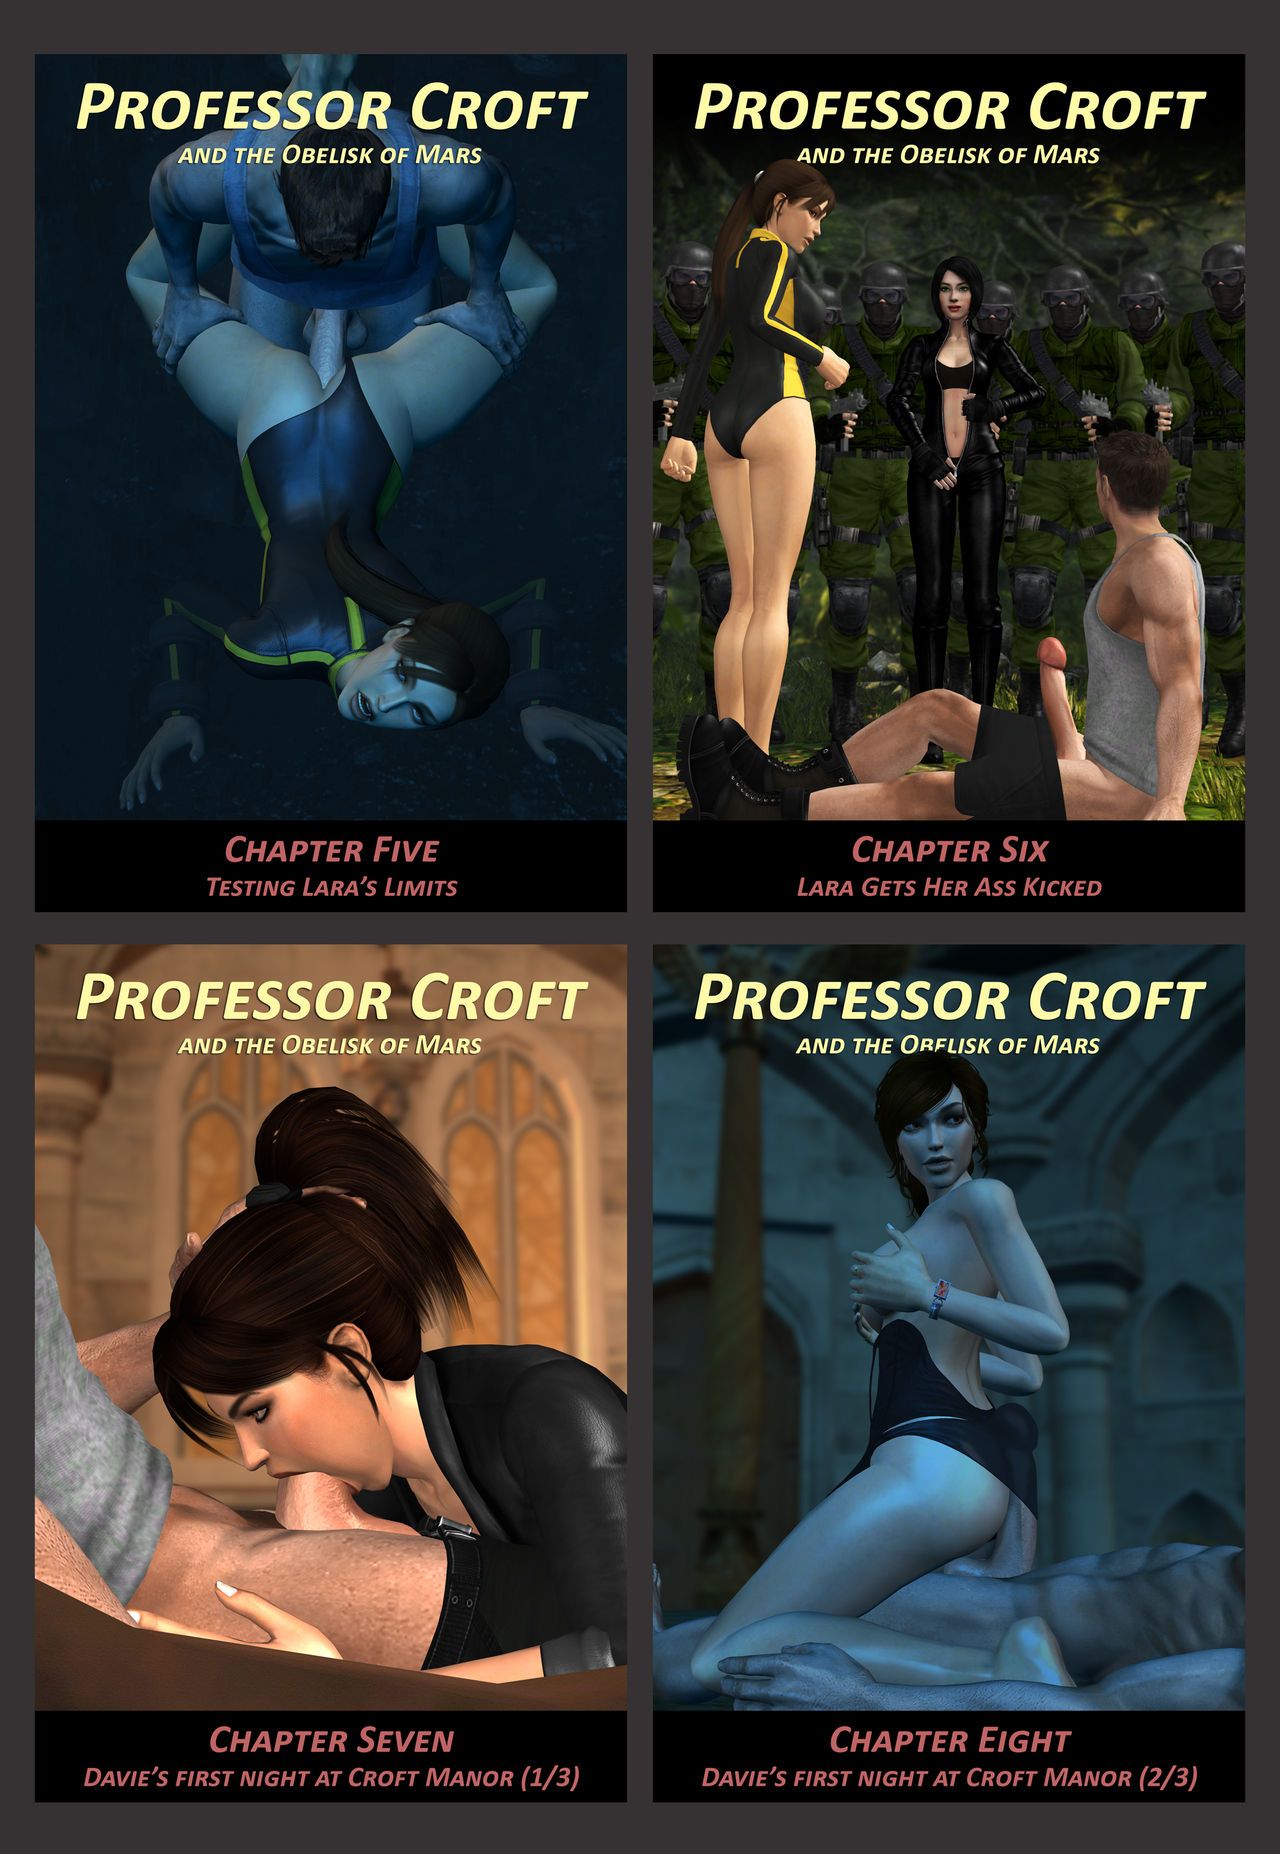 Professor Croft and The Misogynistic Lesson (first part) 4